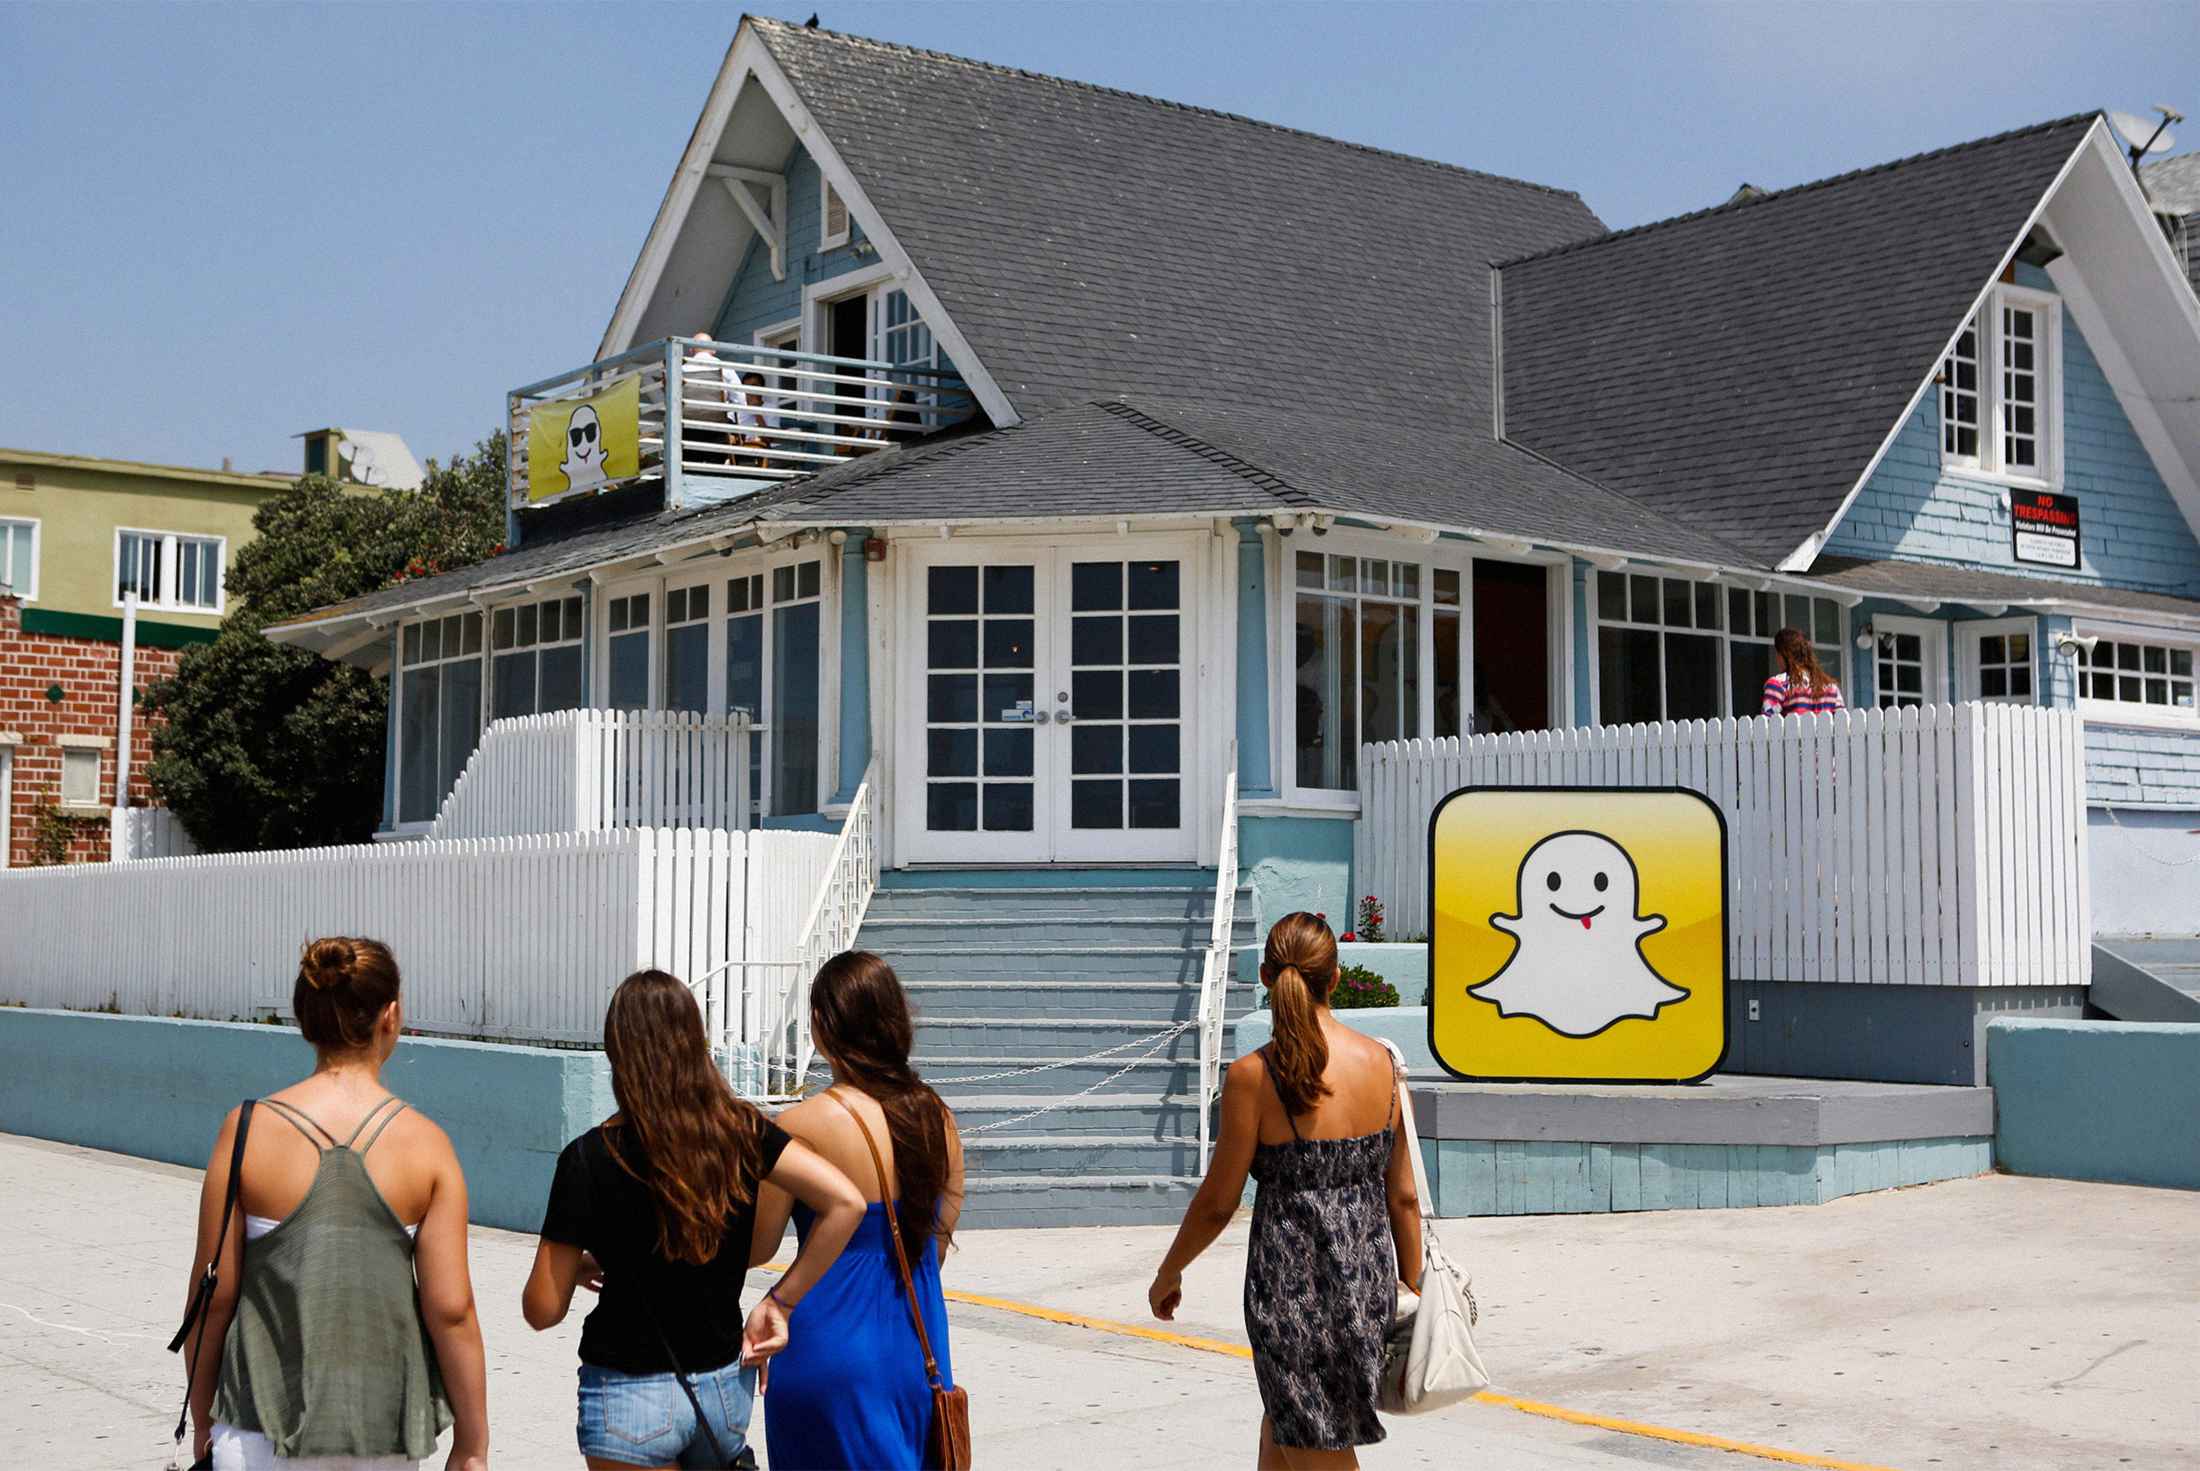 Son Forse Hq - Snapchat Has a Child-Porn Problem - Bloomberg